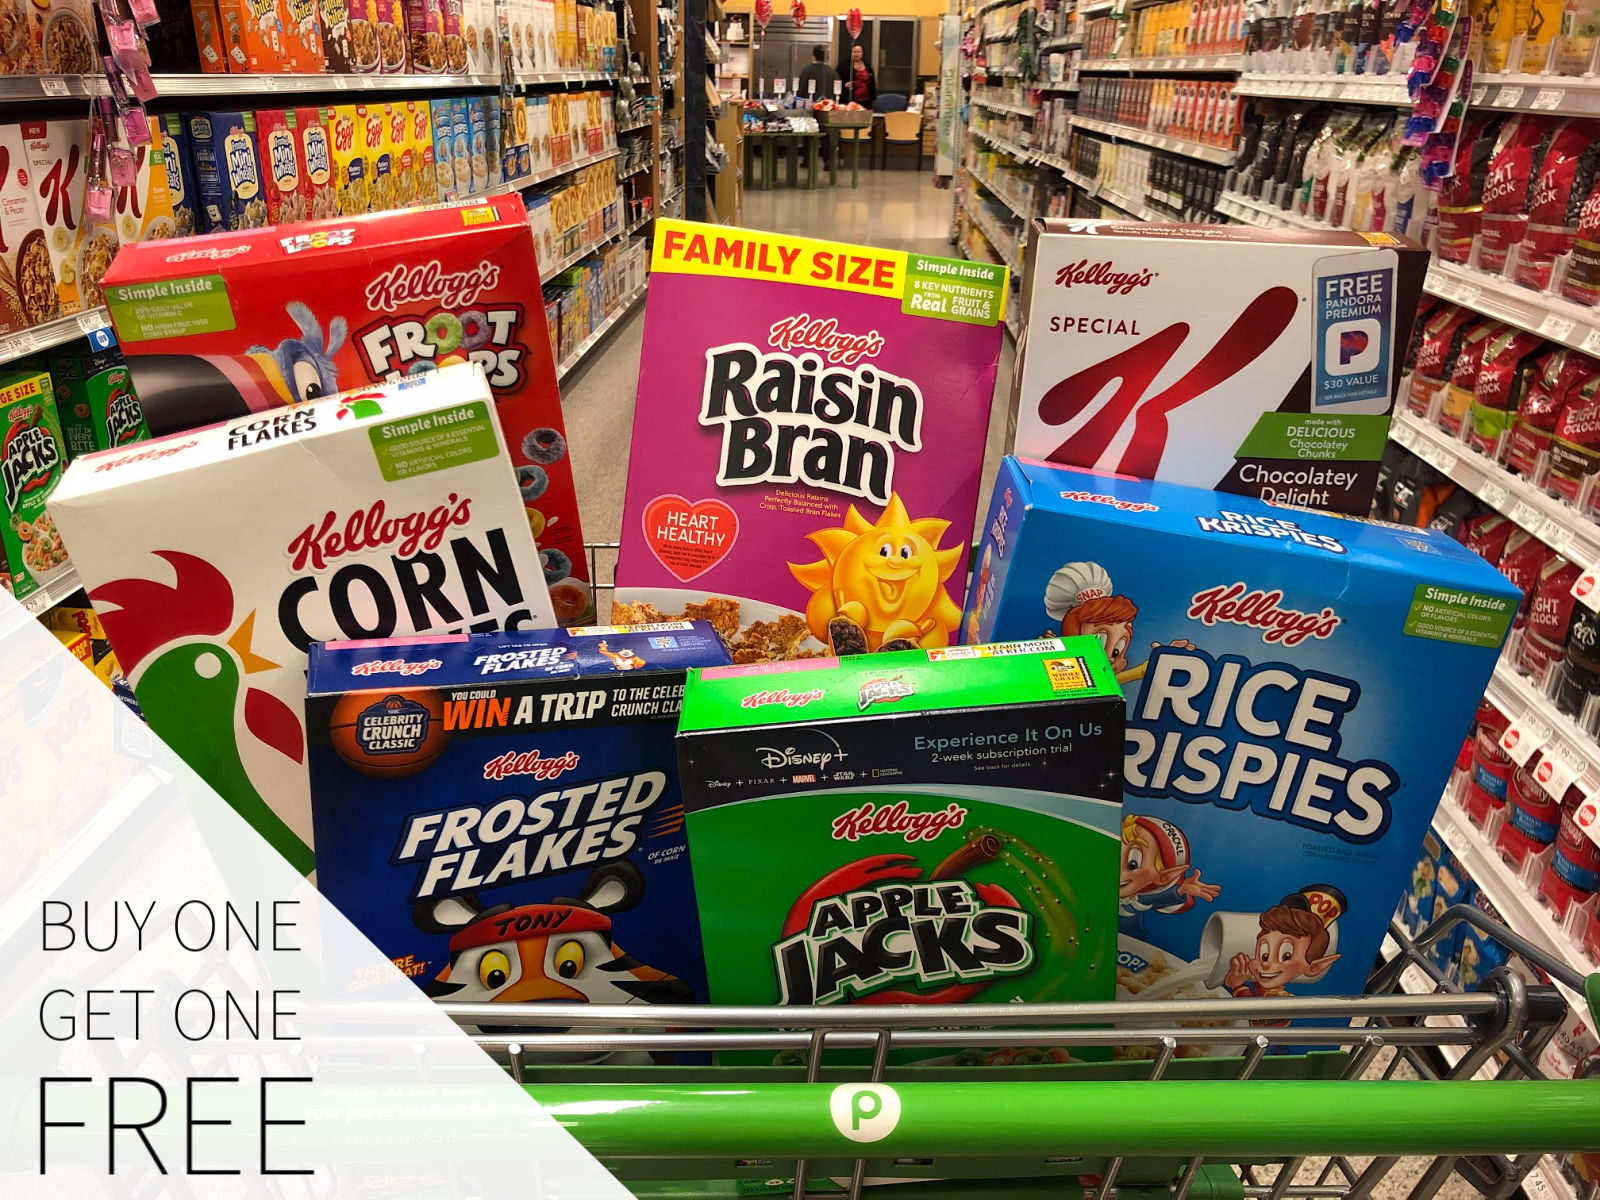 All Kellogg's Cereals Are Buy One Get One FREE At Publix! on I Heart Publix